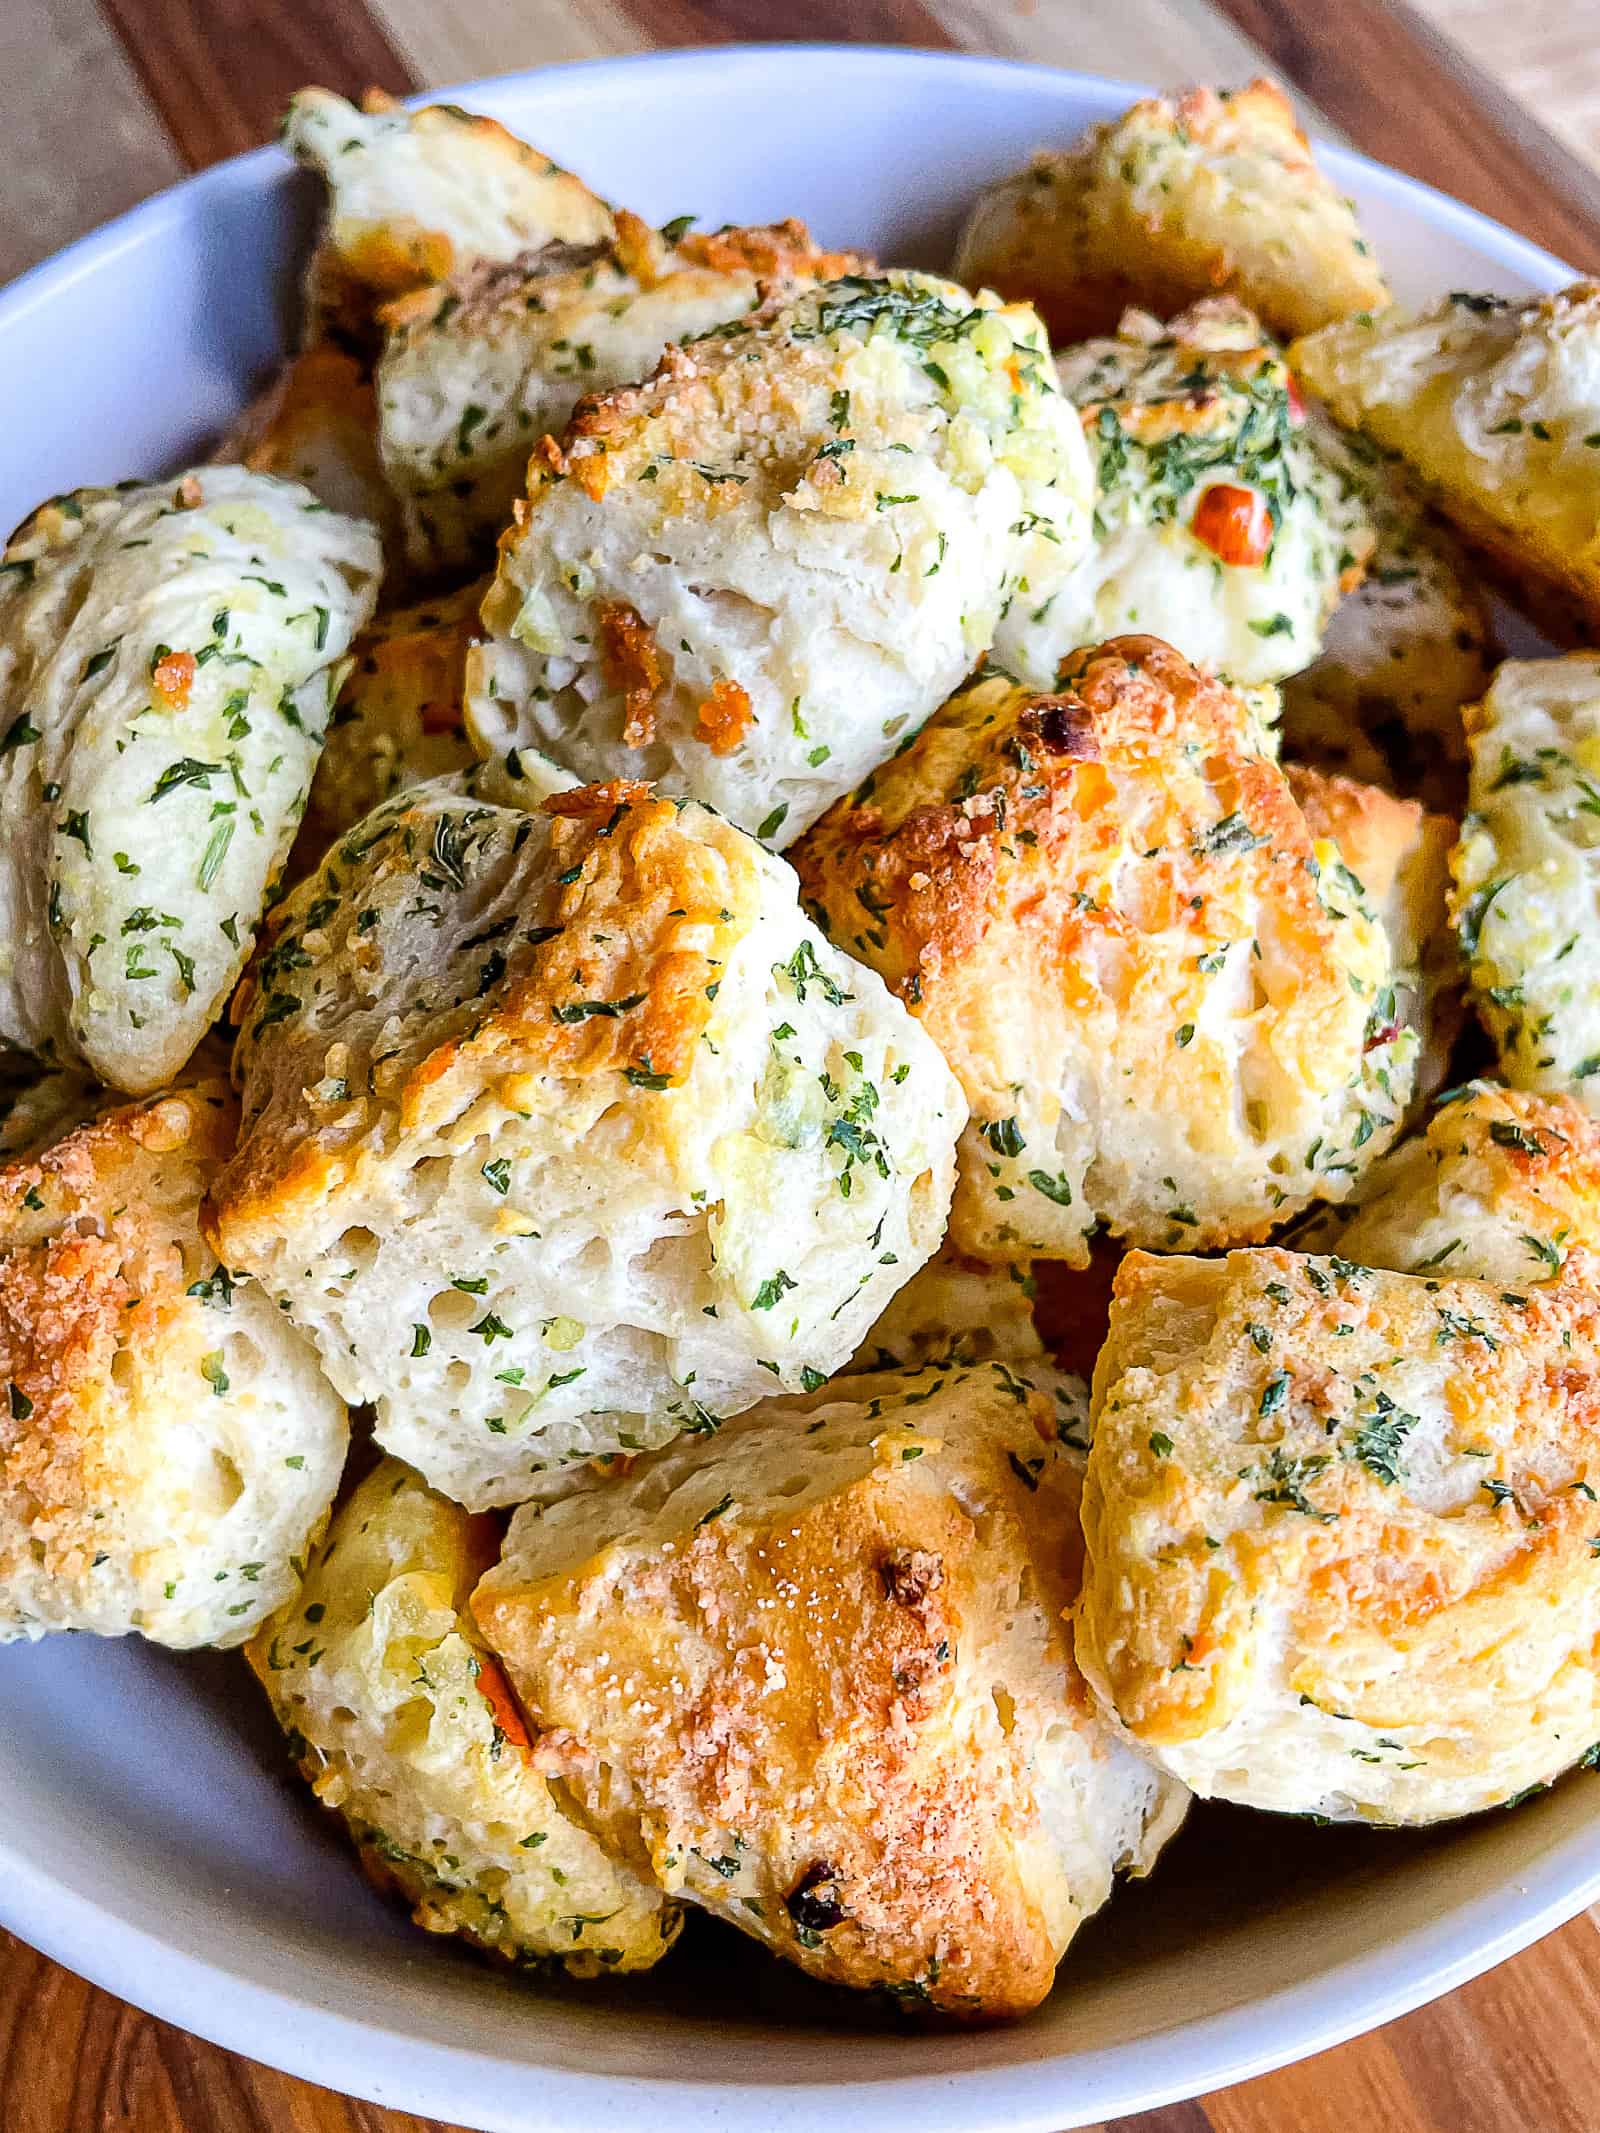 Garlic butter biscuit bites in a bowl.